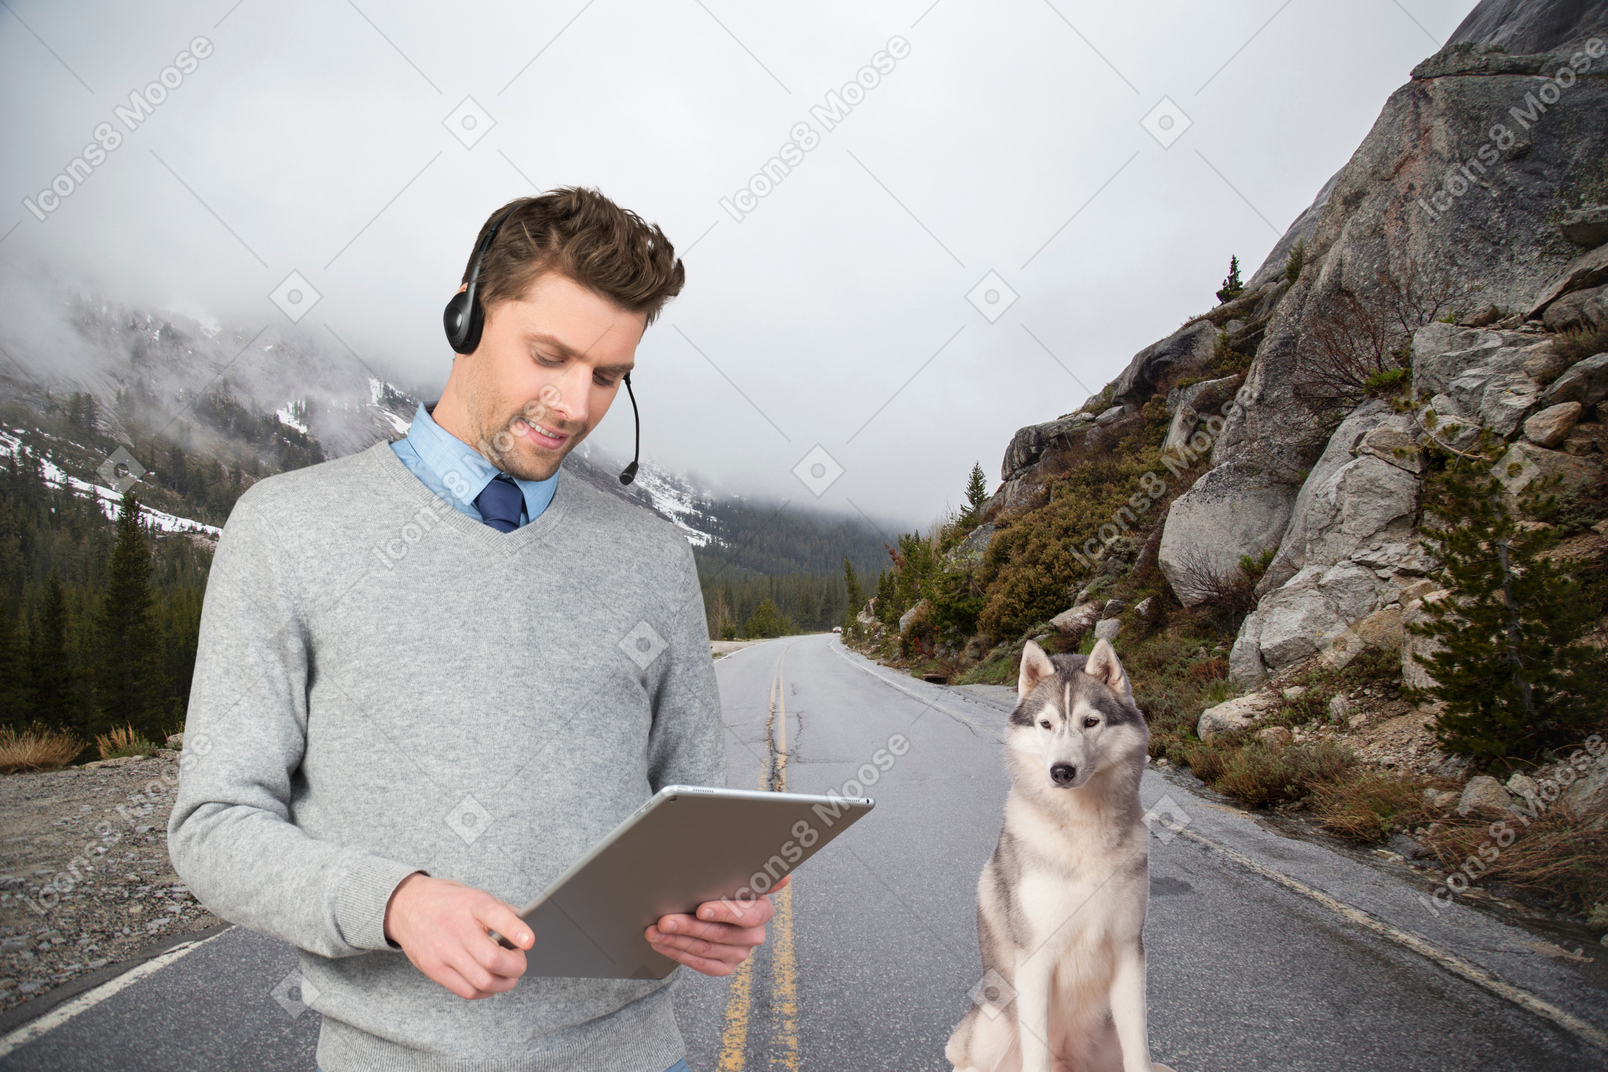 Man working remotely on his ipad while hiking with his dog